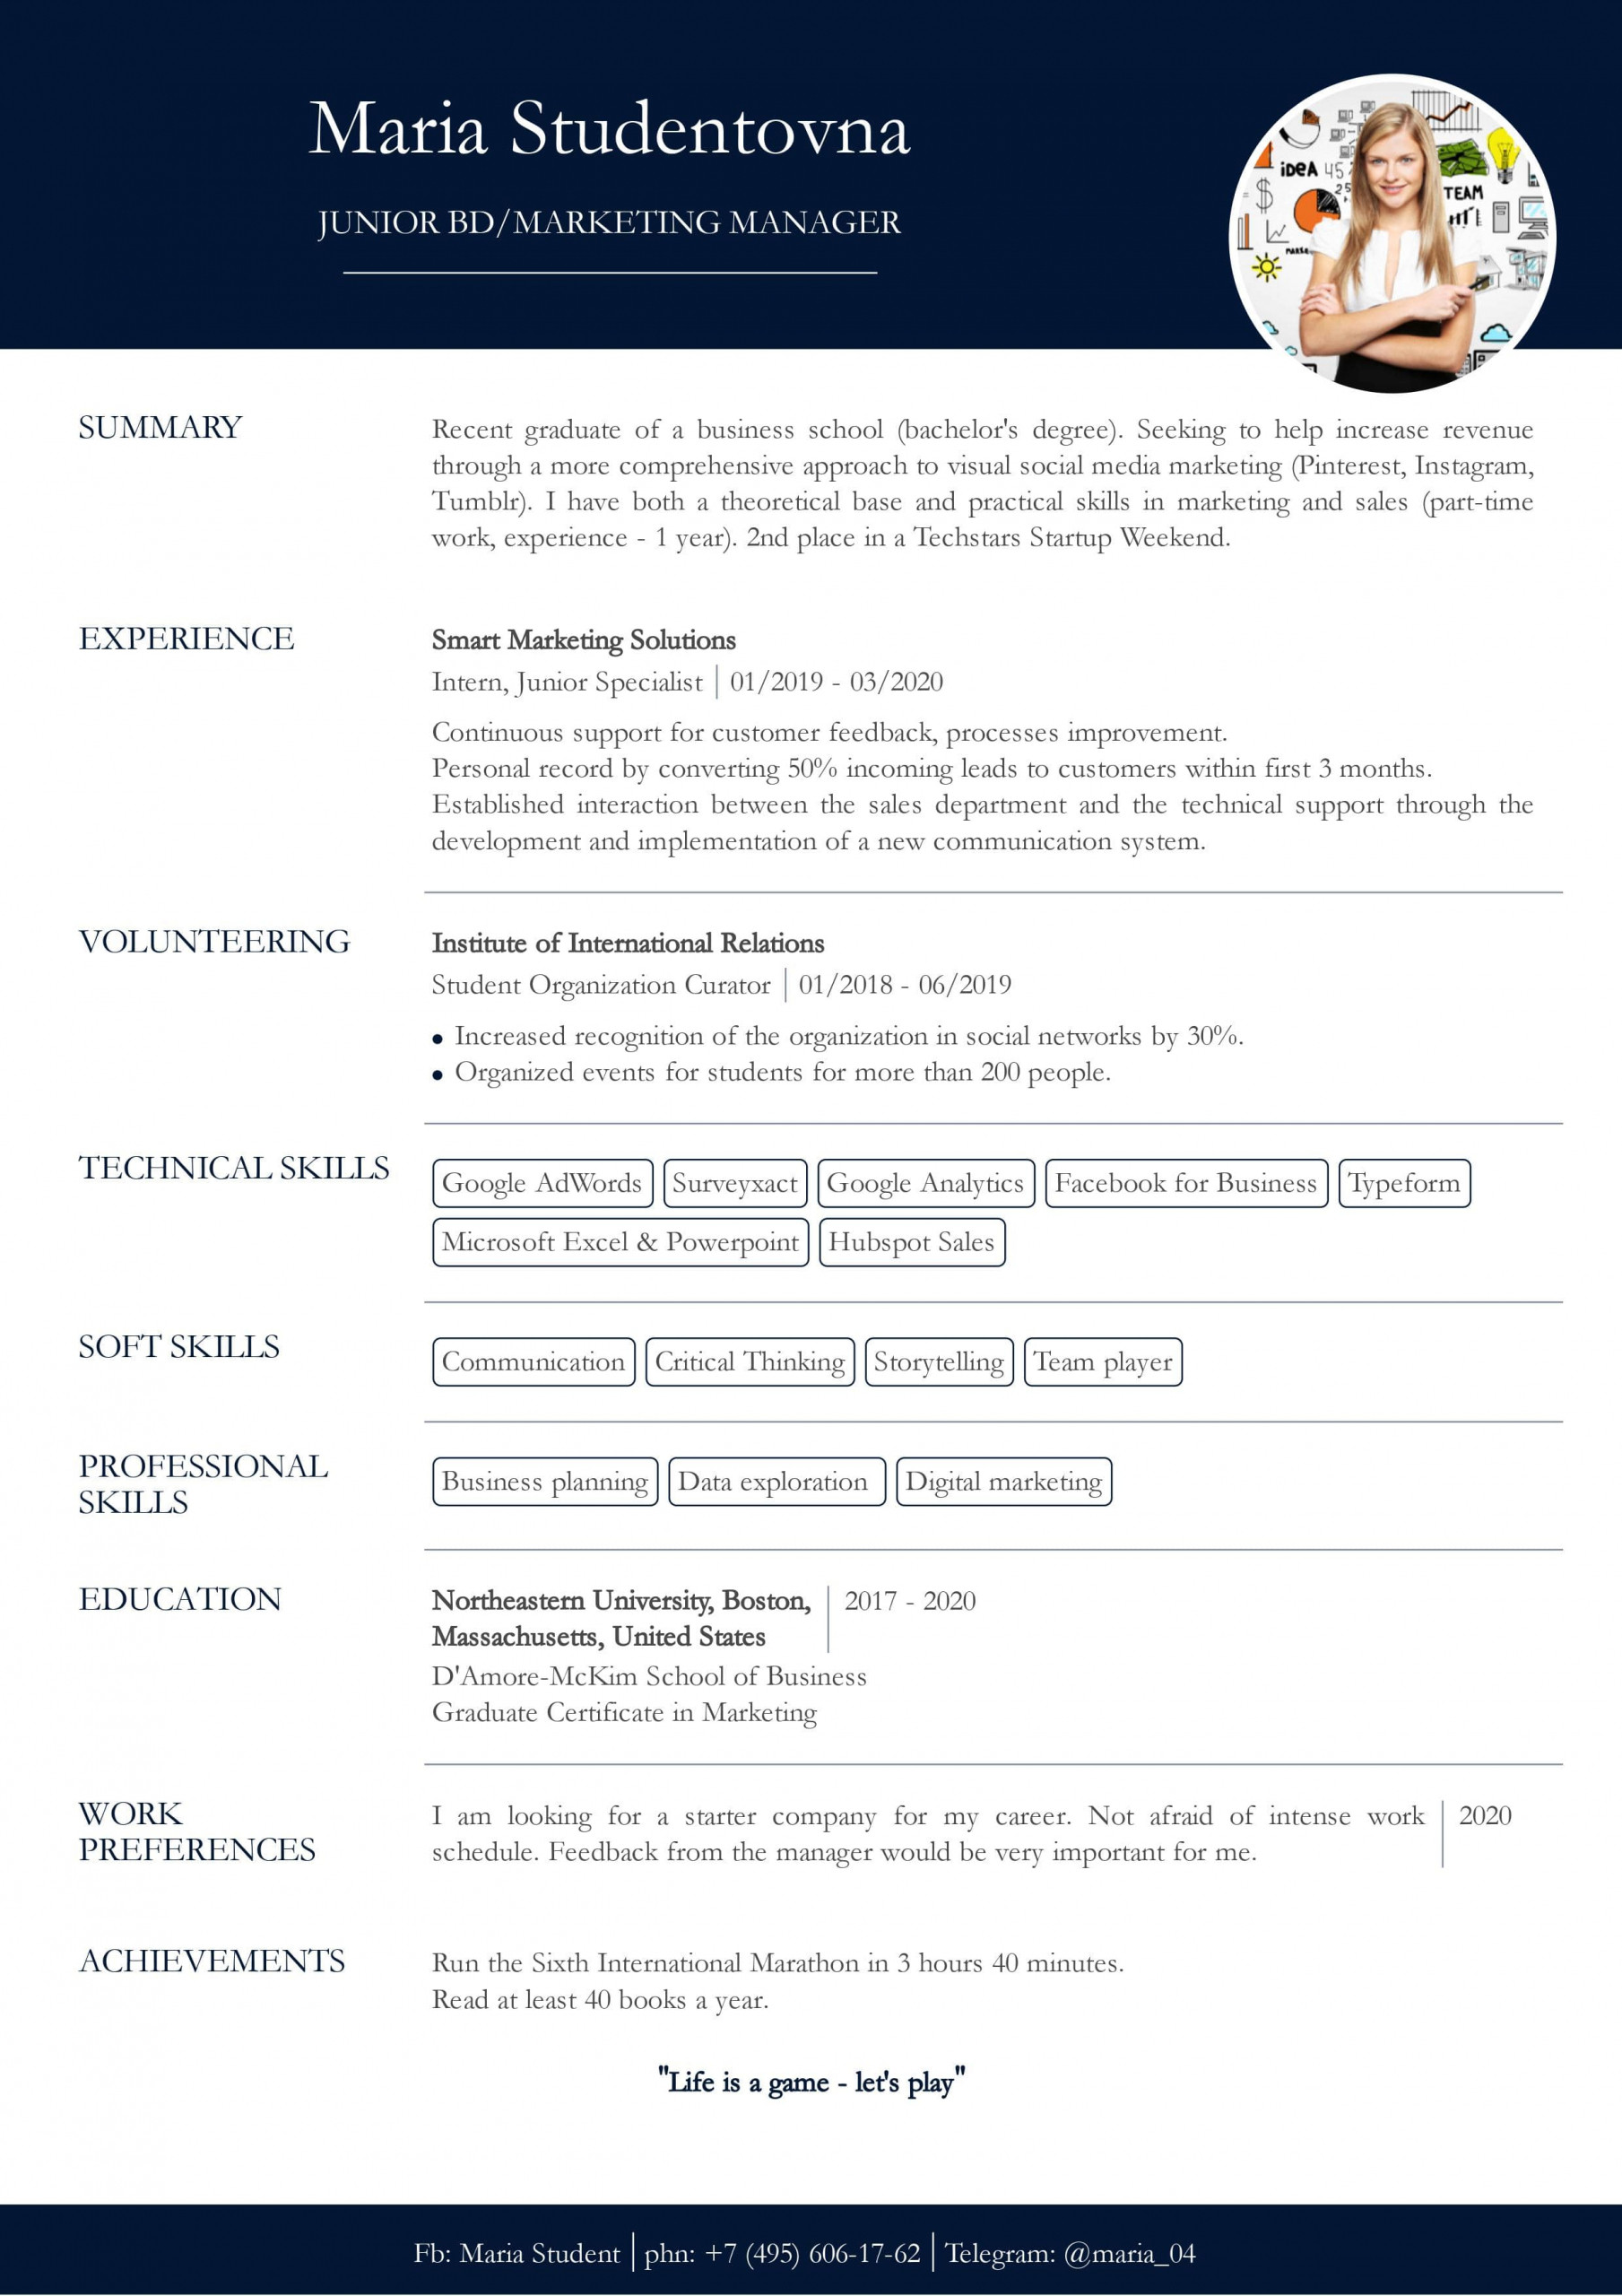 Resume for Undergraduate and No Experience Sample Resume with No Work Experience. Sample for Students. – Cv2you Blog